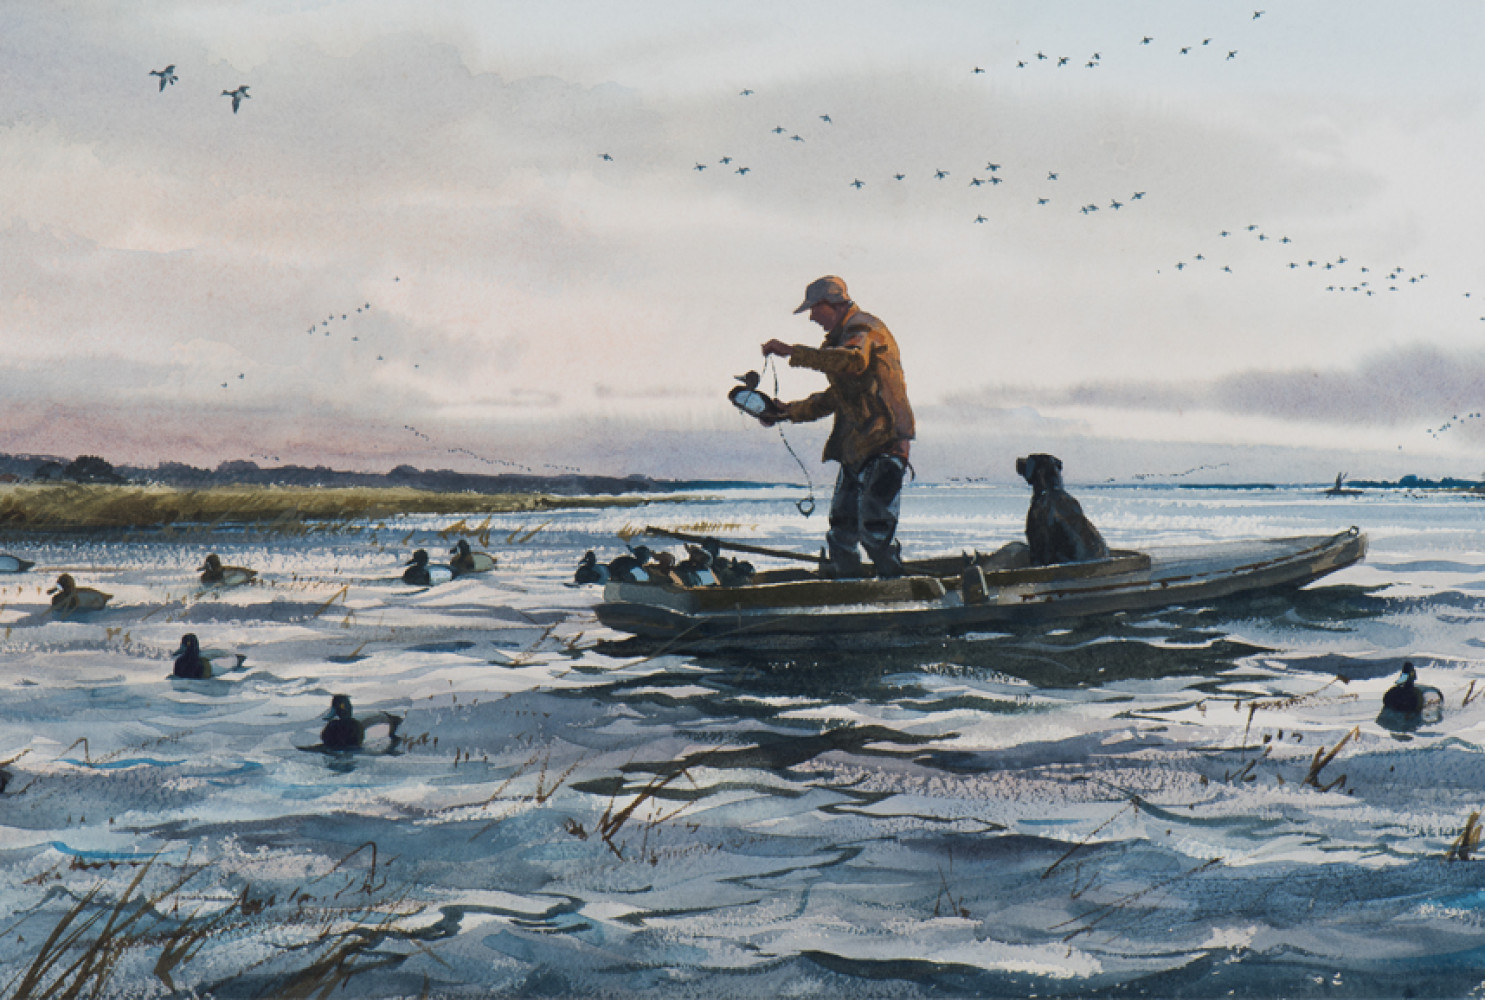 The Broadbill Gunner, 1957, by Ogden M. Pleissner (American, 1905—1983); Watercolor on paper, 19 3/8 x 29 1/8 inches; Collection of Shelburne Museum, gift of Ann M. Leonard; 2013-14.1; Photograph by Andy Duback